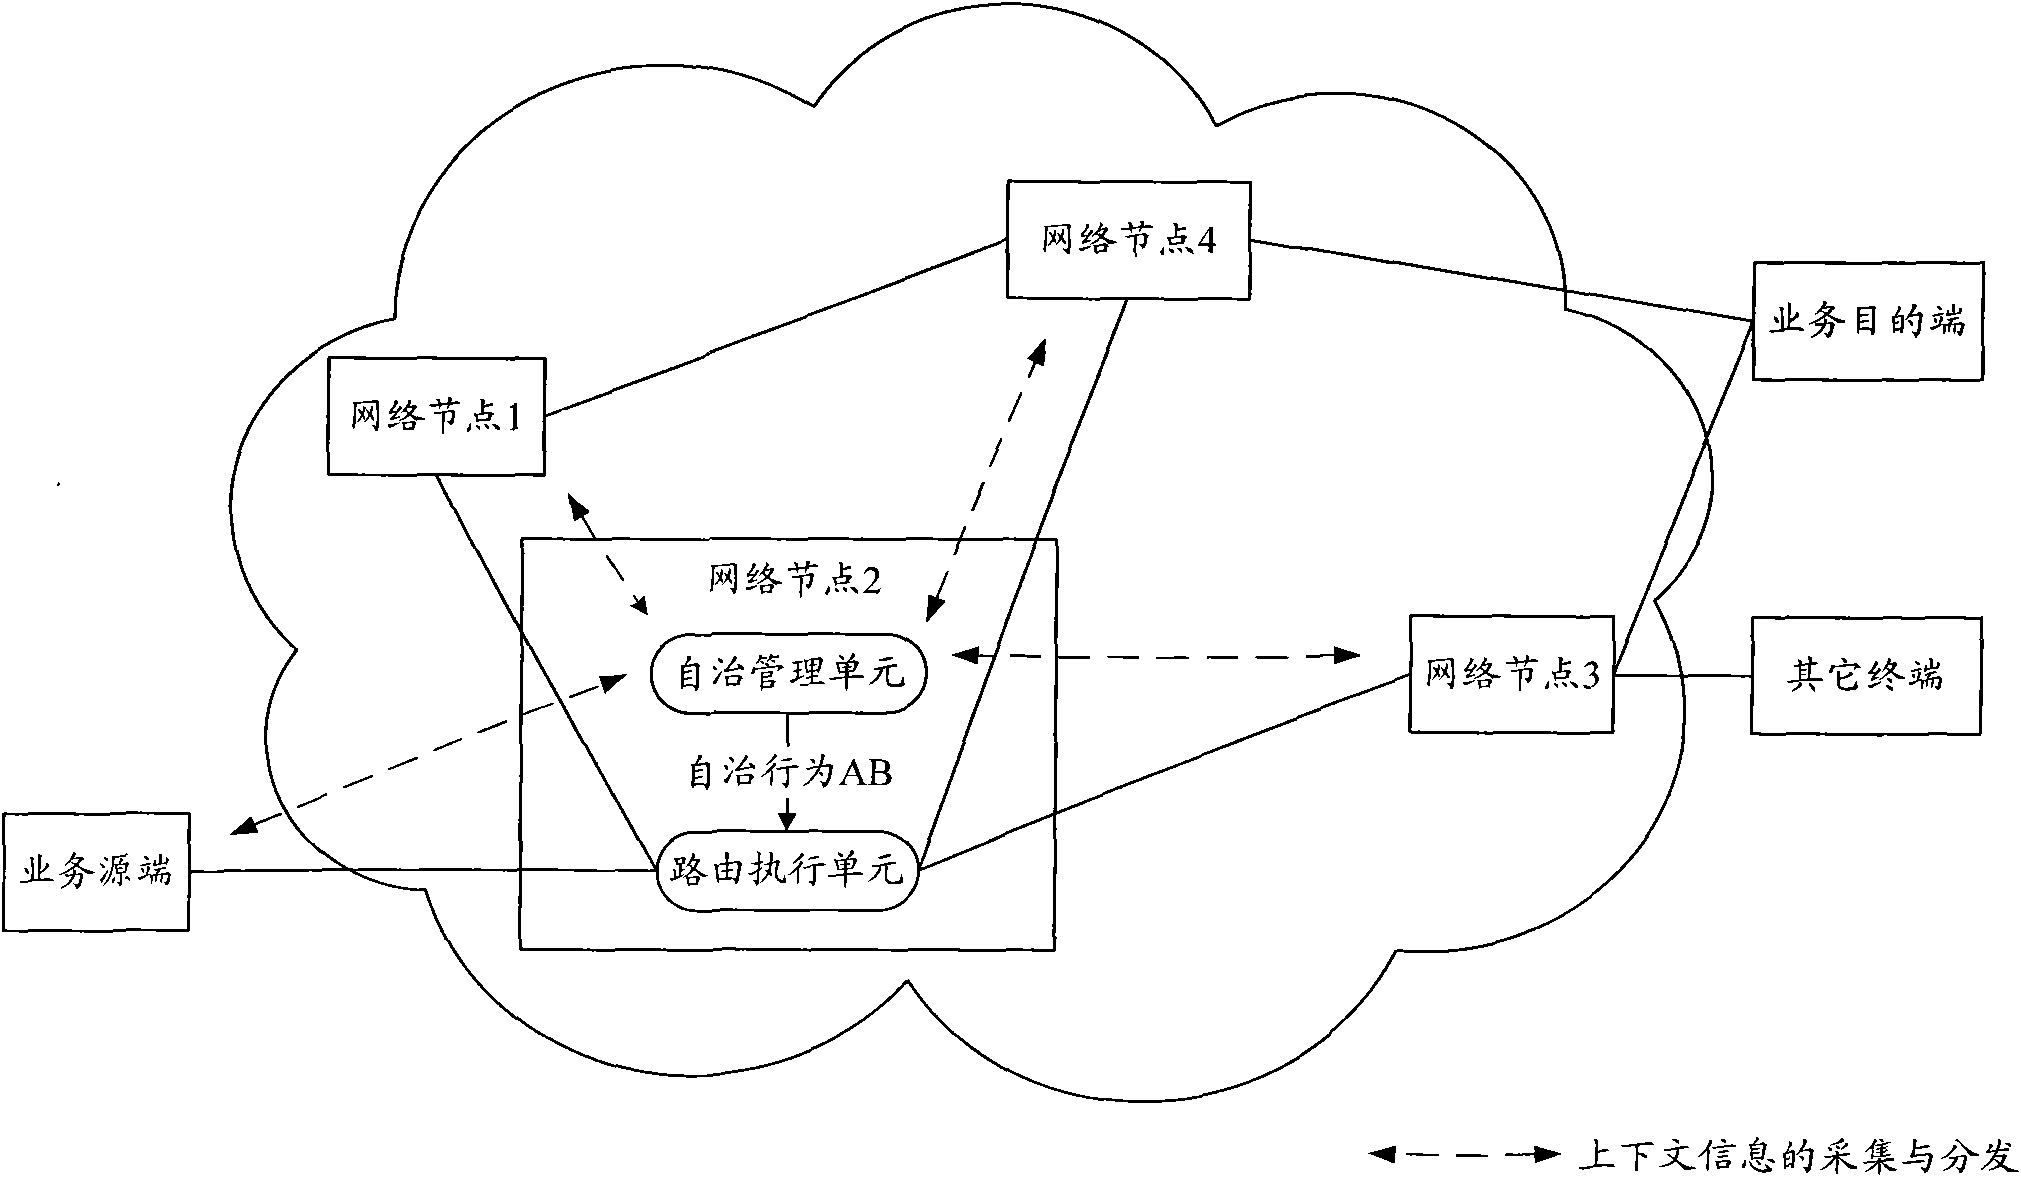 Network node and method for realizing autonomous routing control by sensing network context information